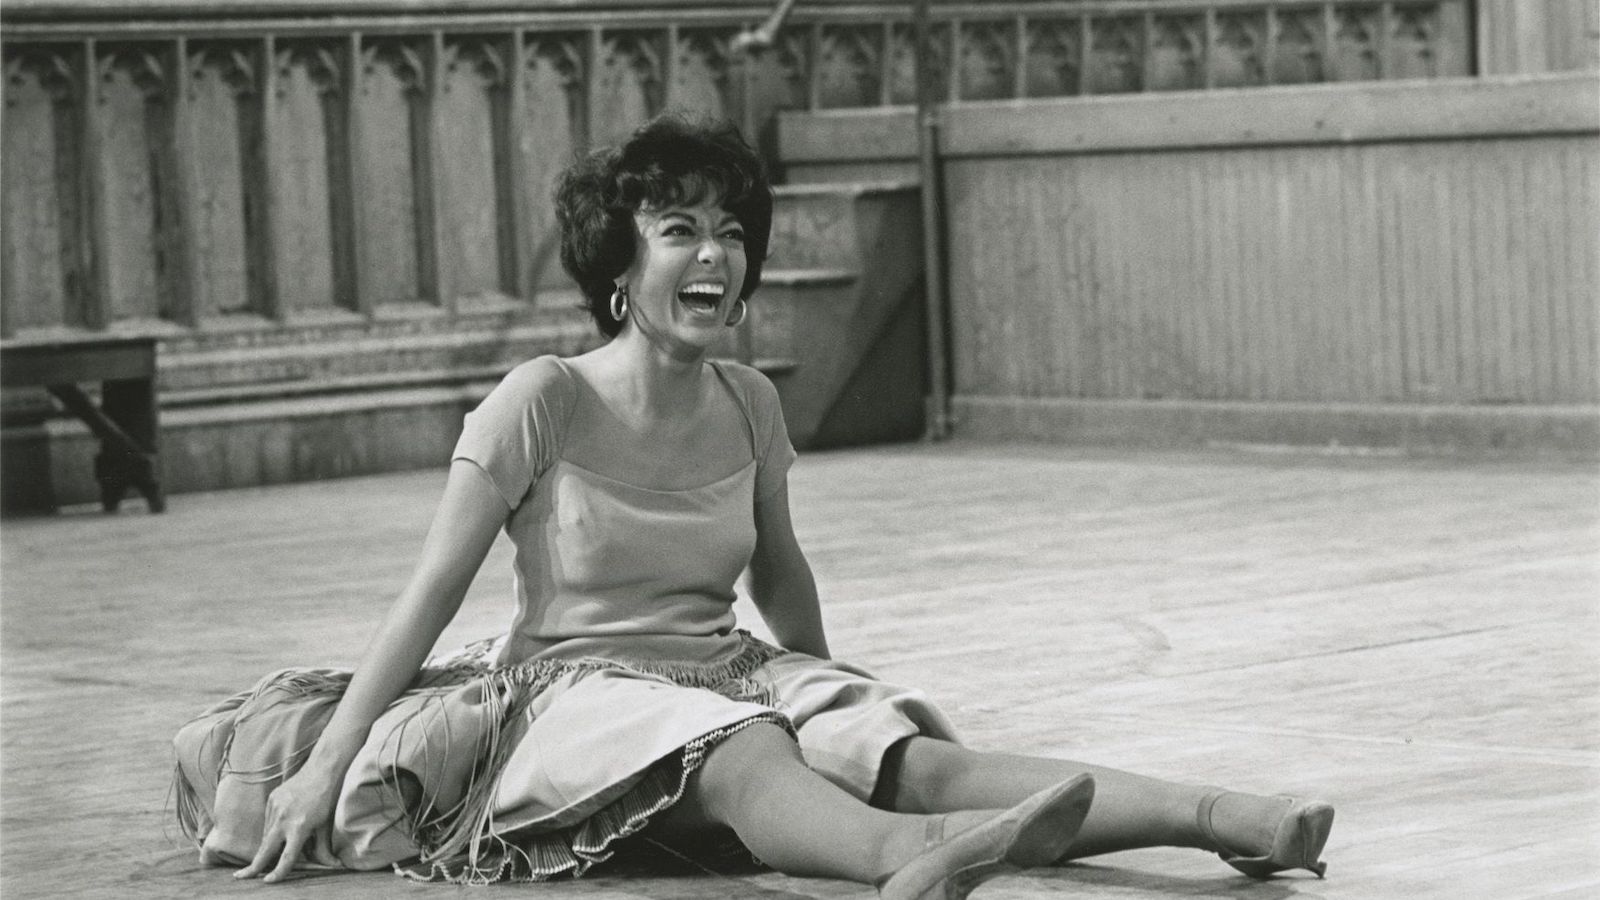 A smiling woman sits on the floor, taking a break from dancing.